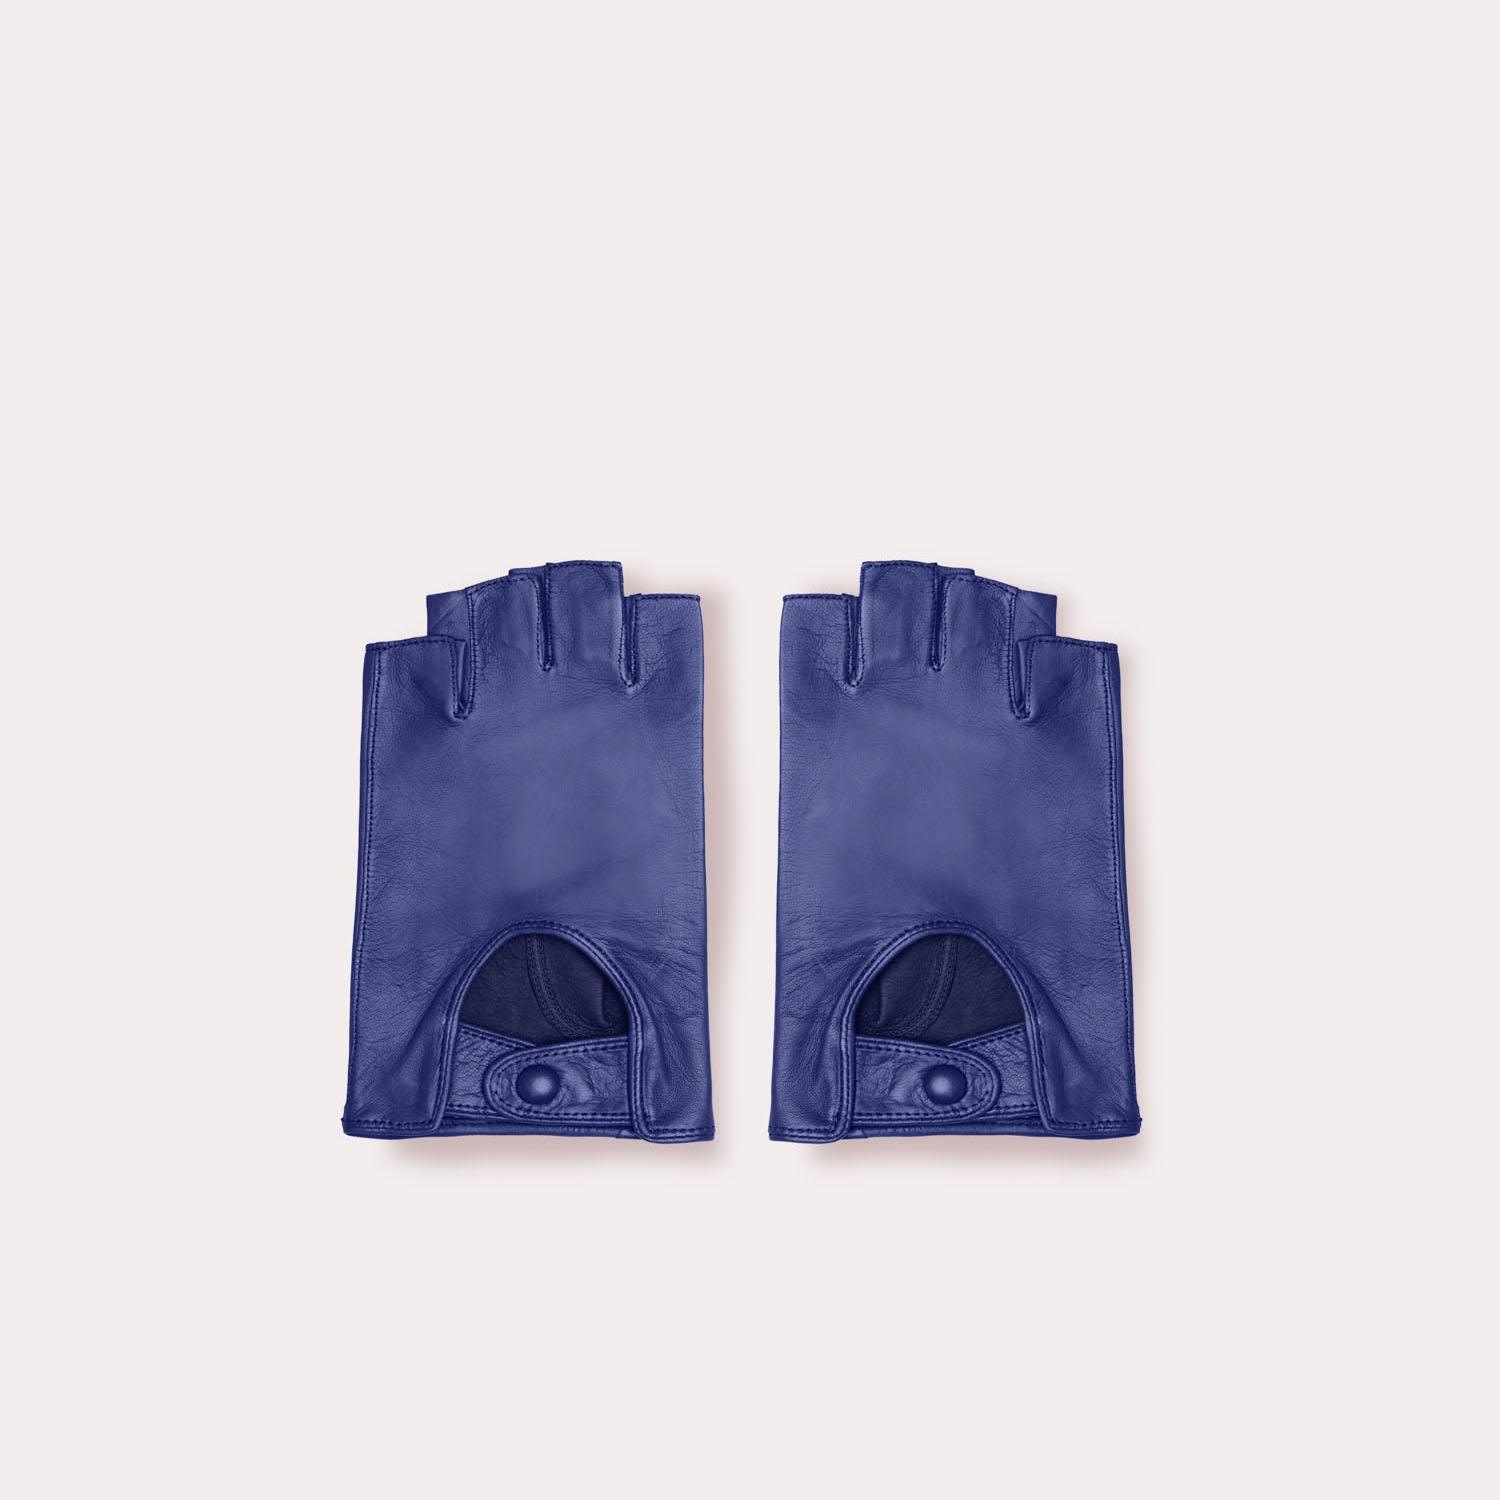 Men's blue fingerless driving gloves made from ethically sourced Italian leather. 